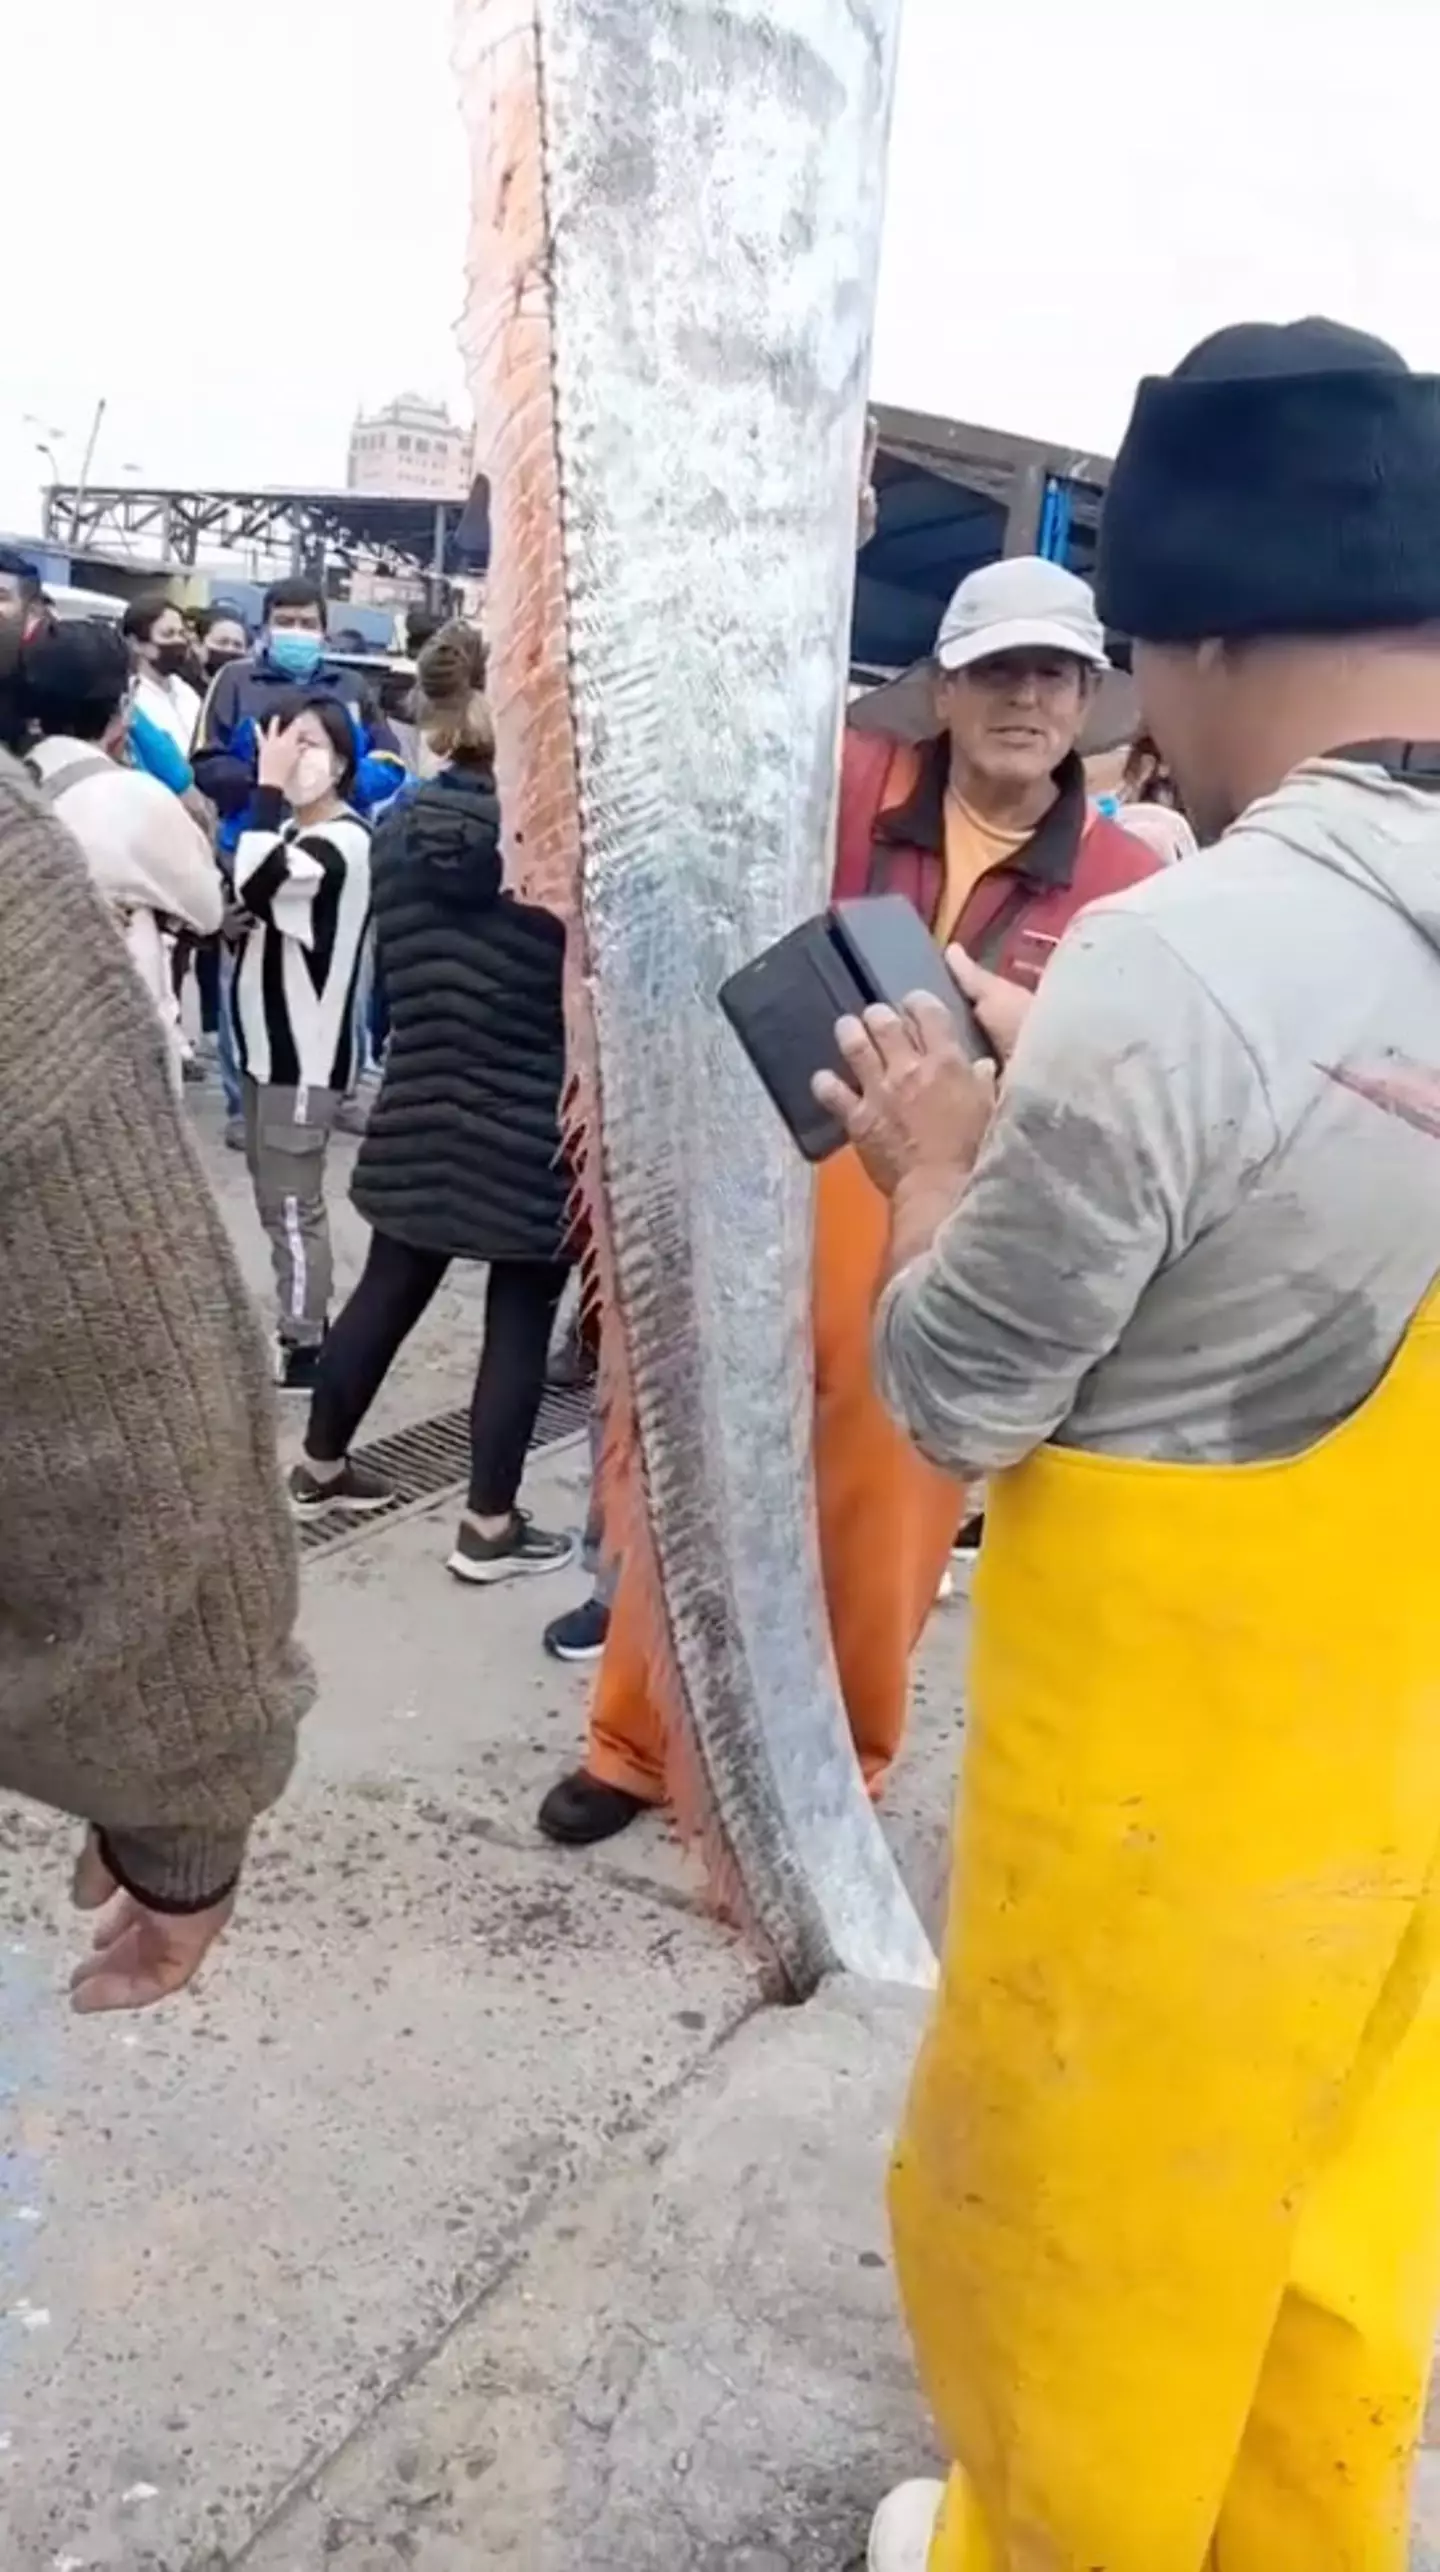 Oarfish usually live in the depths of the ocean.